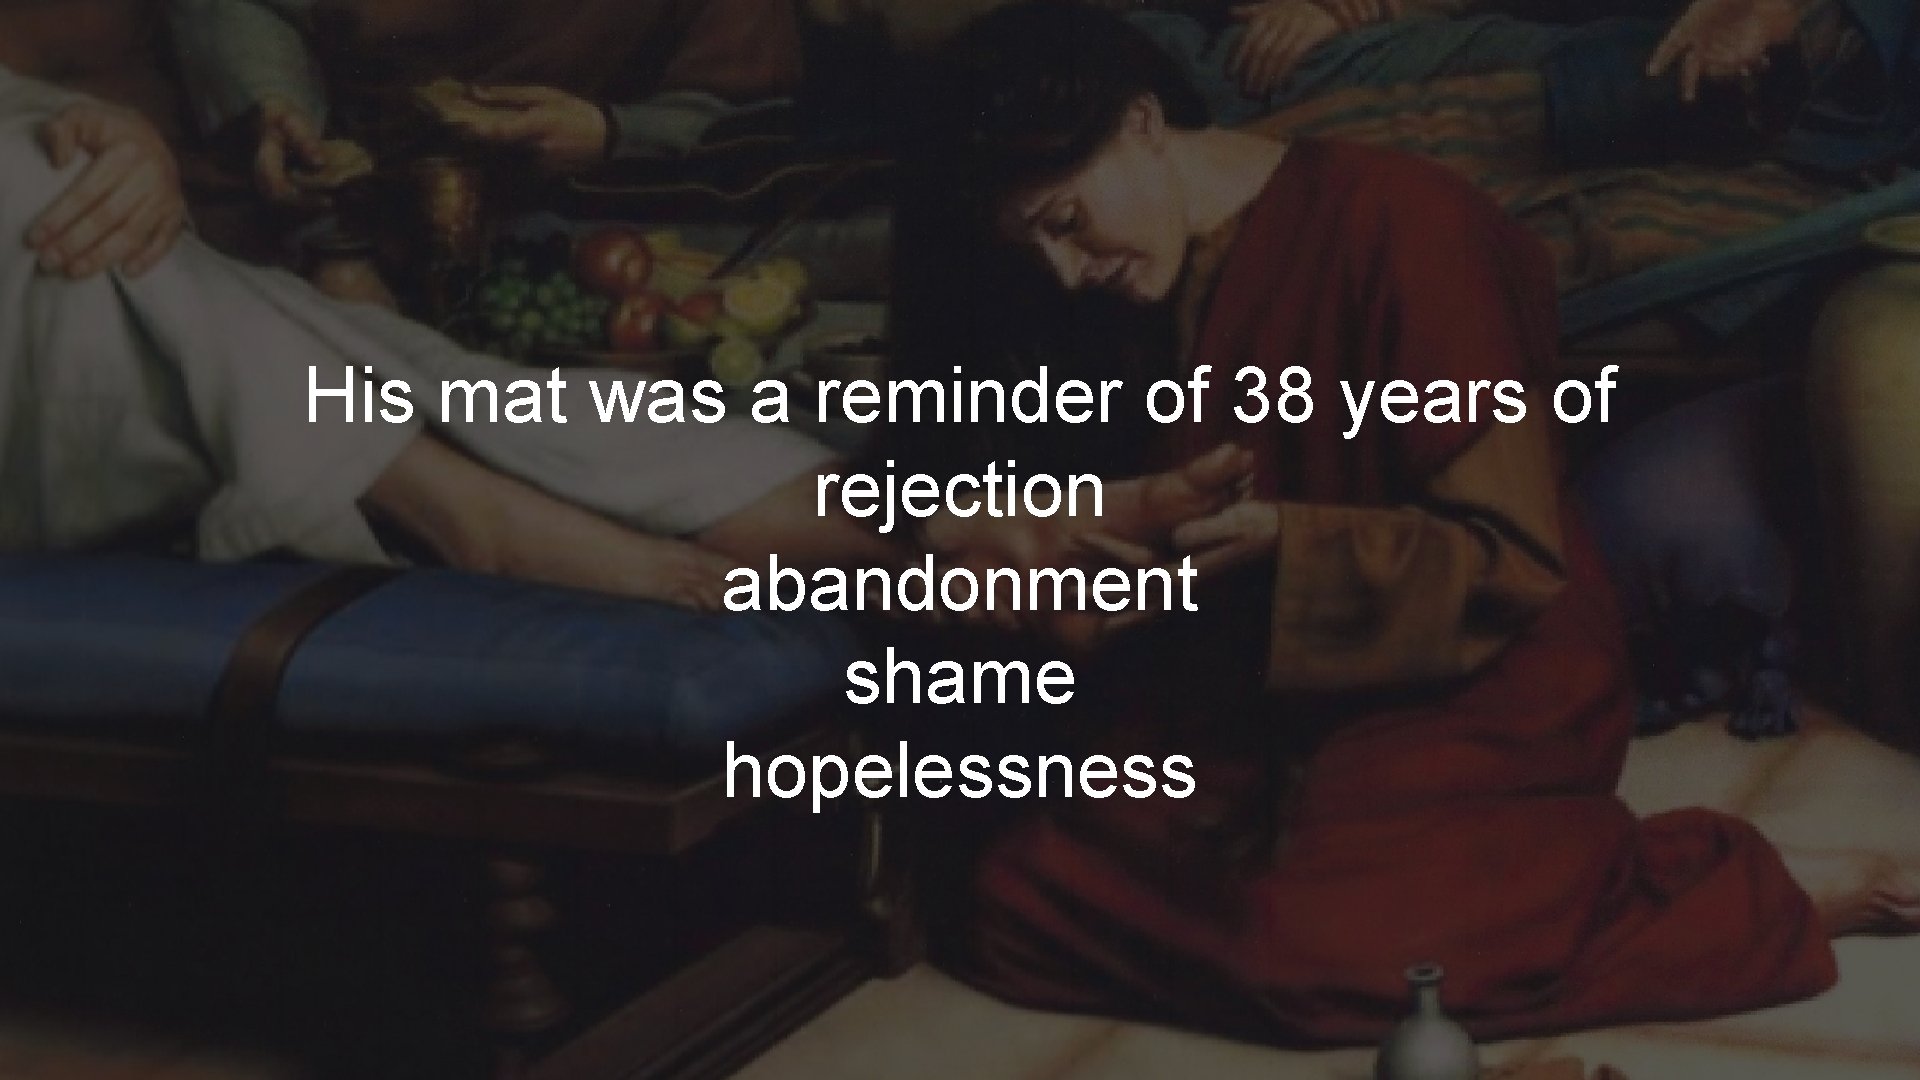 His mat was a reminder of 38 years of rejection abandonment shame hopelessness 